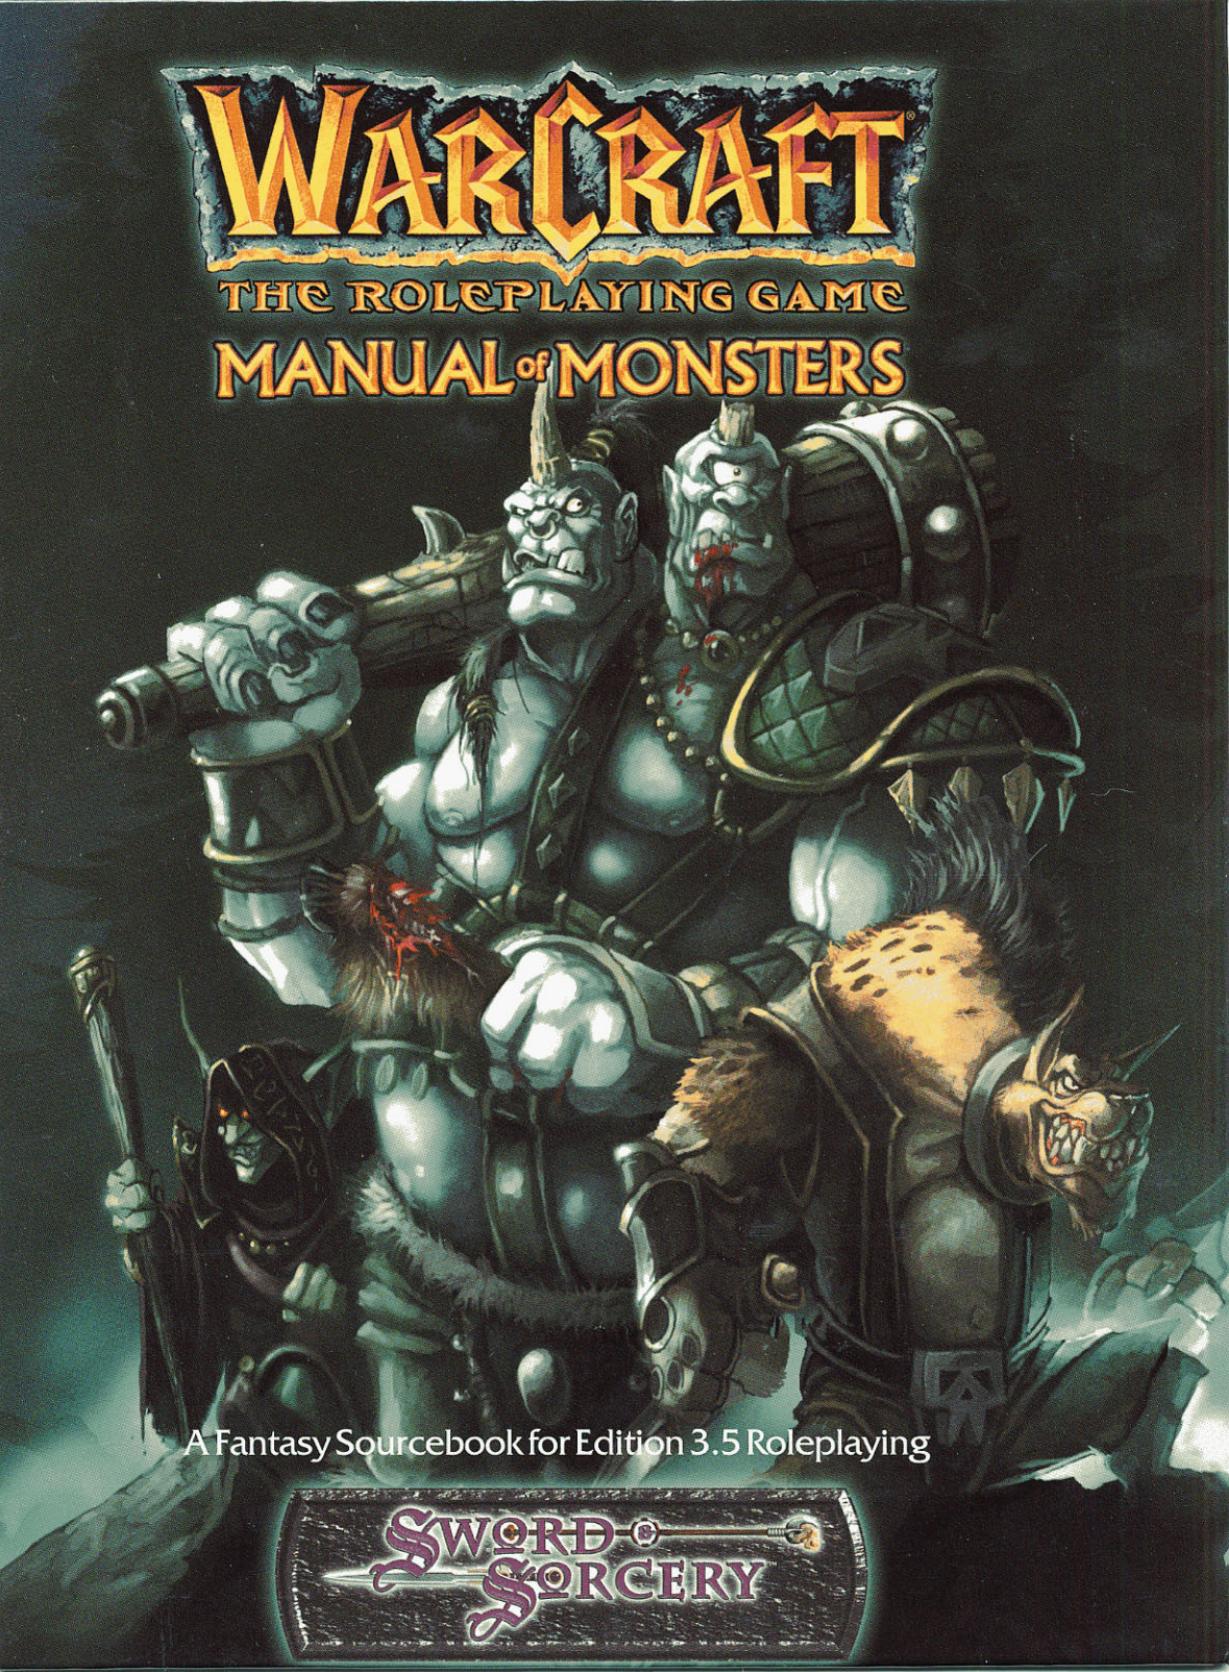 Manual of Monsters by Sword && Sorcery